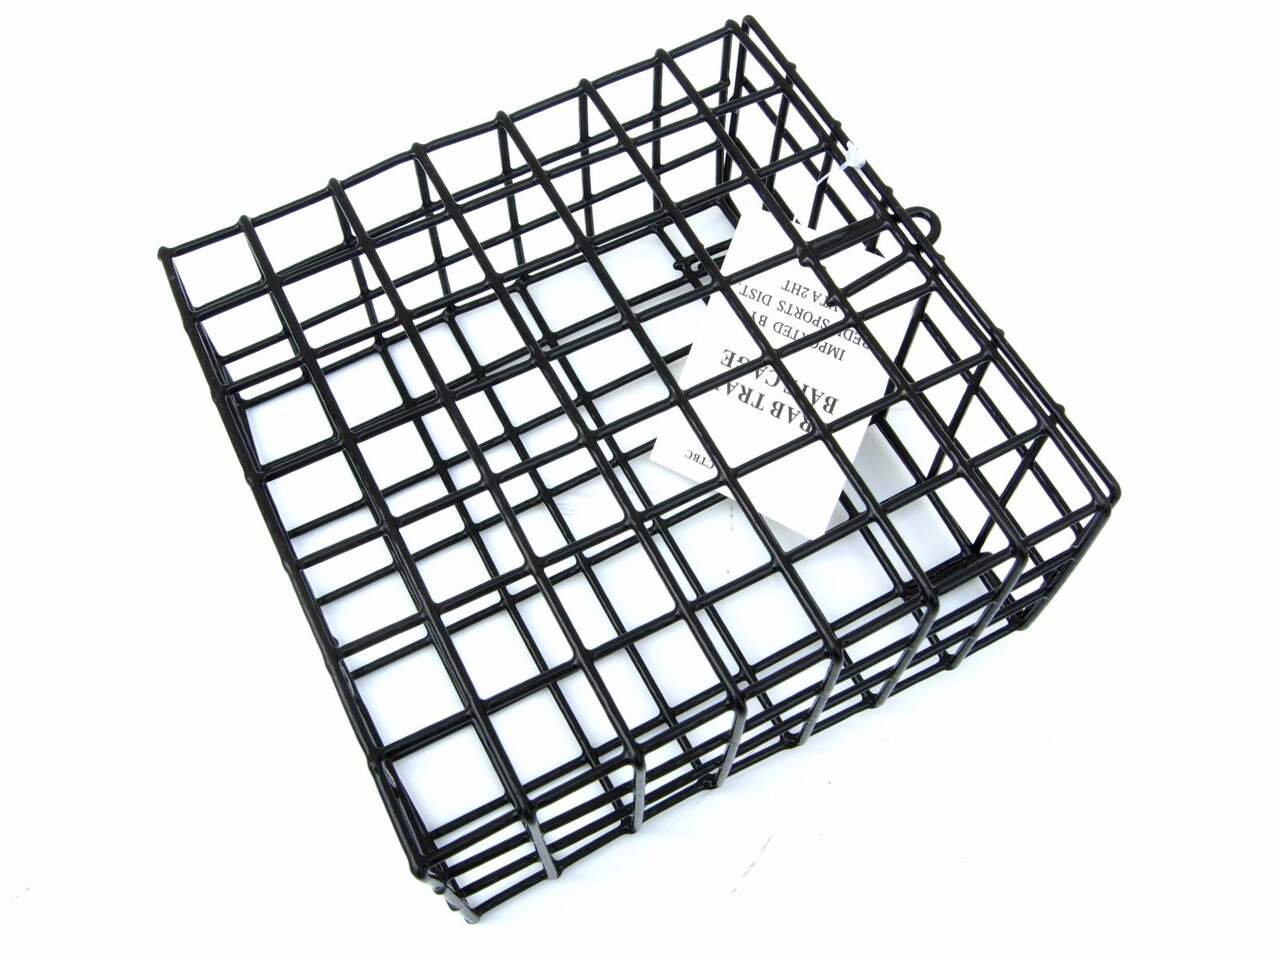 Portable Fishing Cage, Stainless Steel Collapsible Mesh Fishing Bait  Storage Cage, Resistant to Floating Fish Basket with Floating Bowl, for  Outdoor